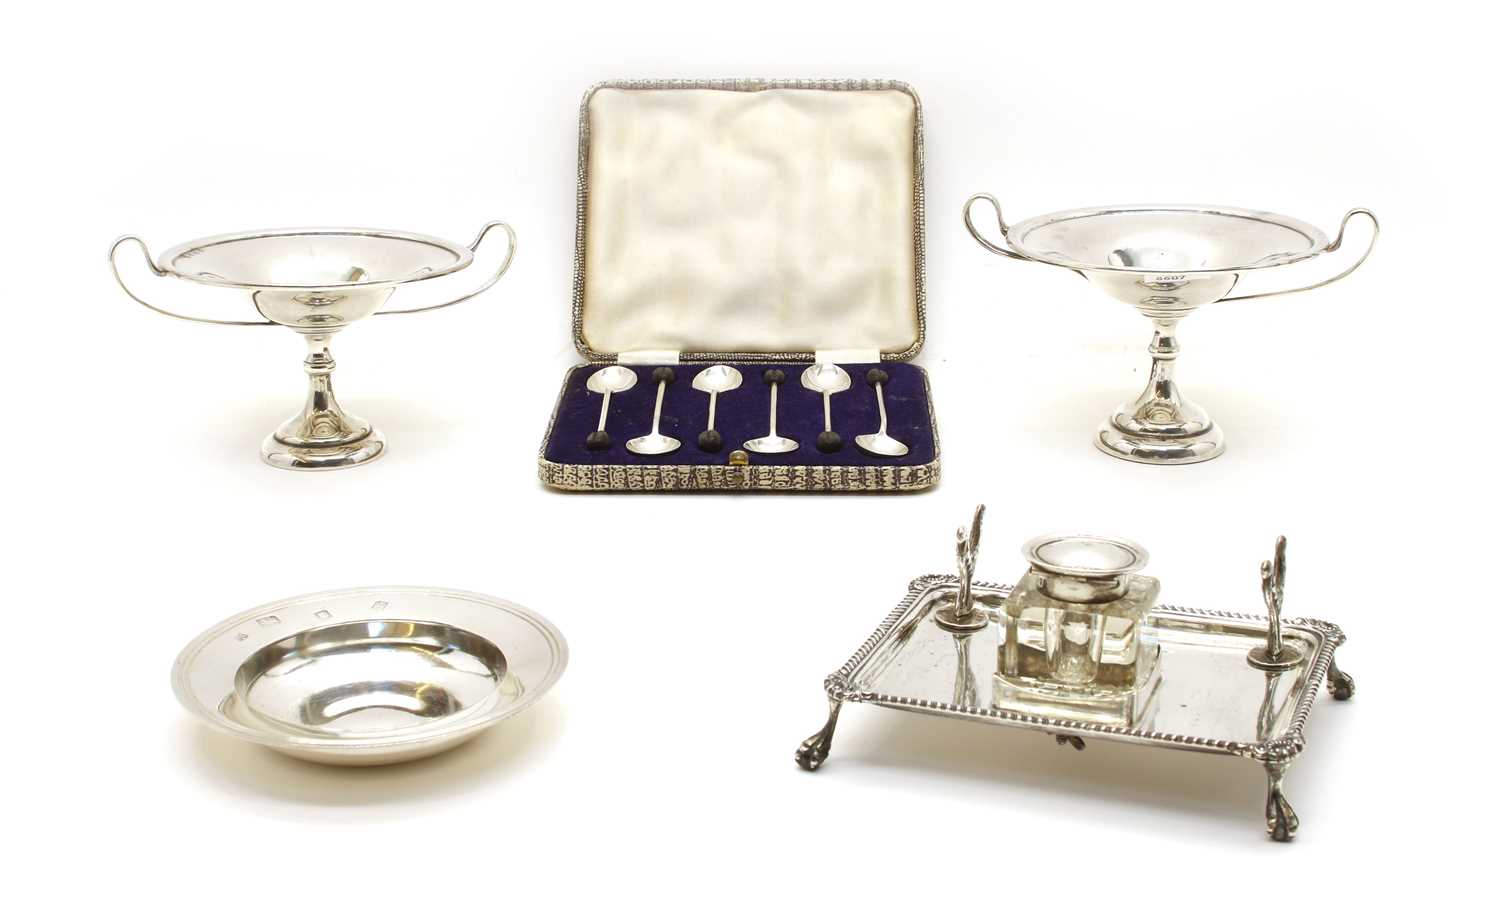 Lot 3 - Silver items comprising a pair of small tazzas by Charles Green & Co, Birmingham 1906